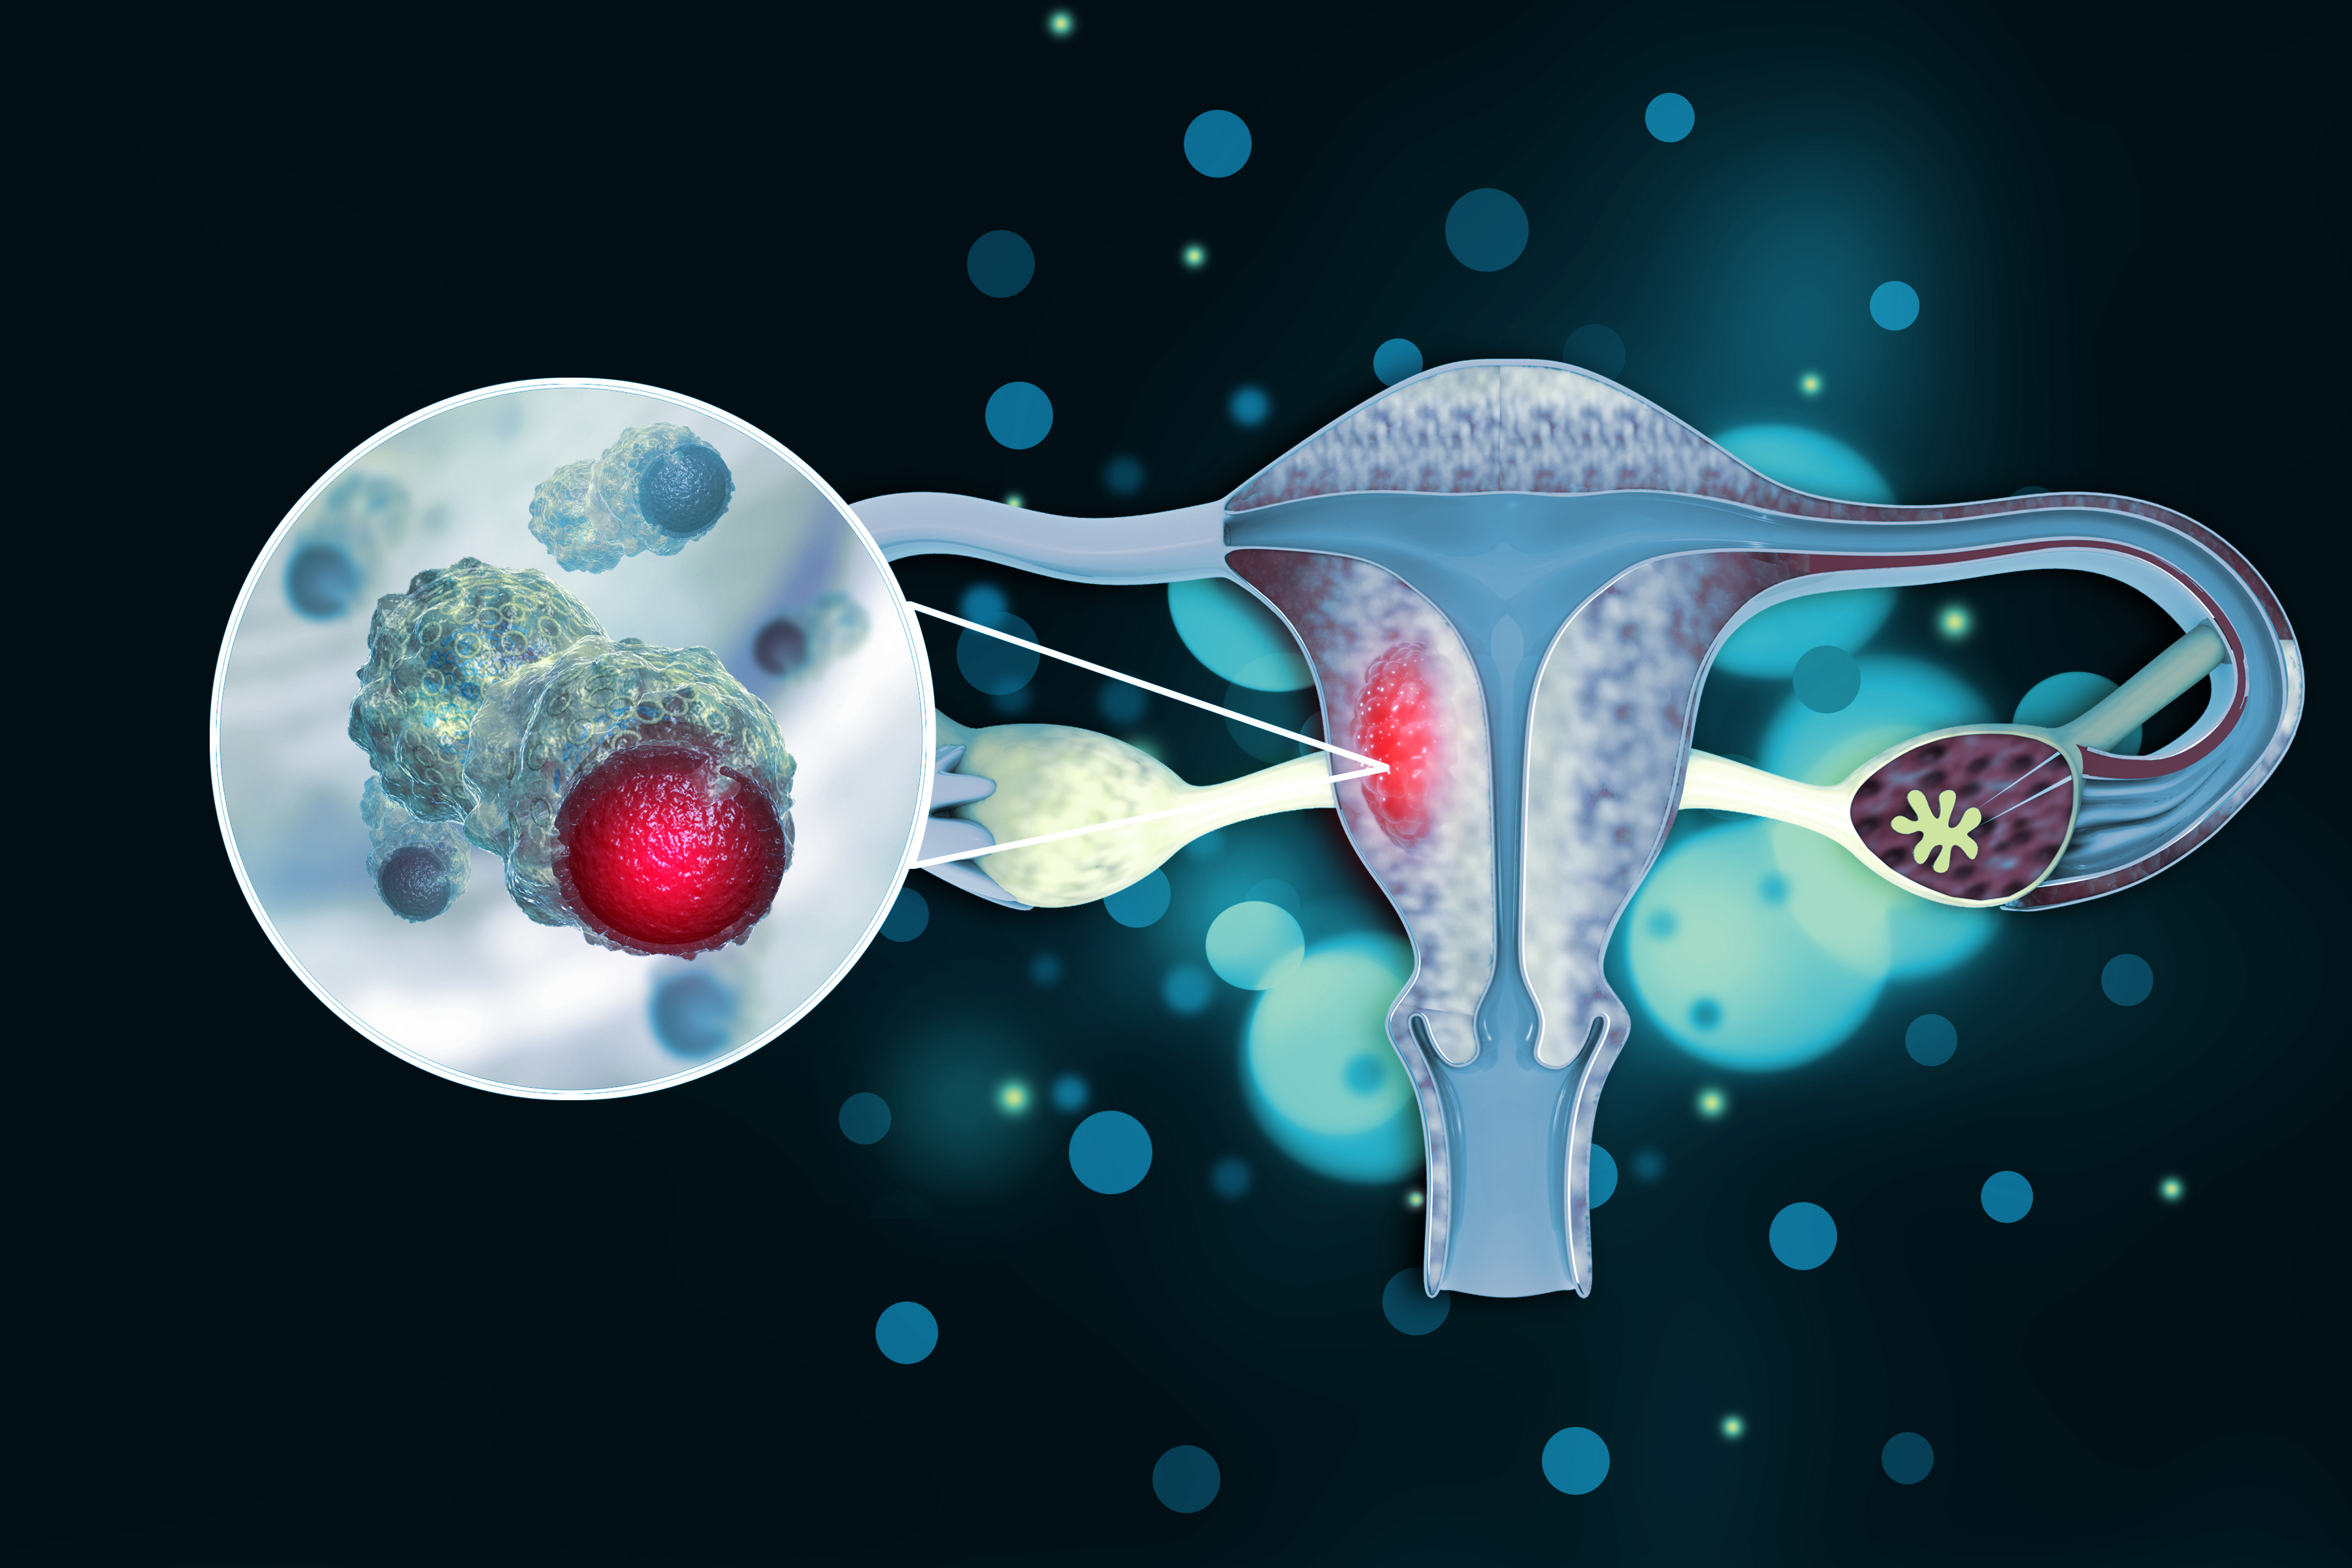 Utilization & Outcomes of Sentinel Lymph Node Biopsy for Early Endometrial Cancer